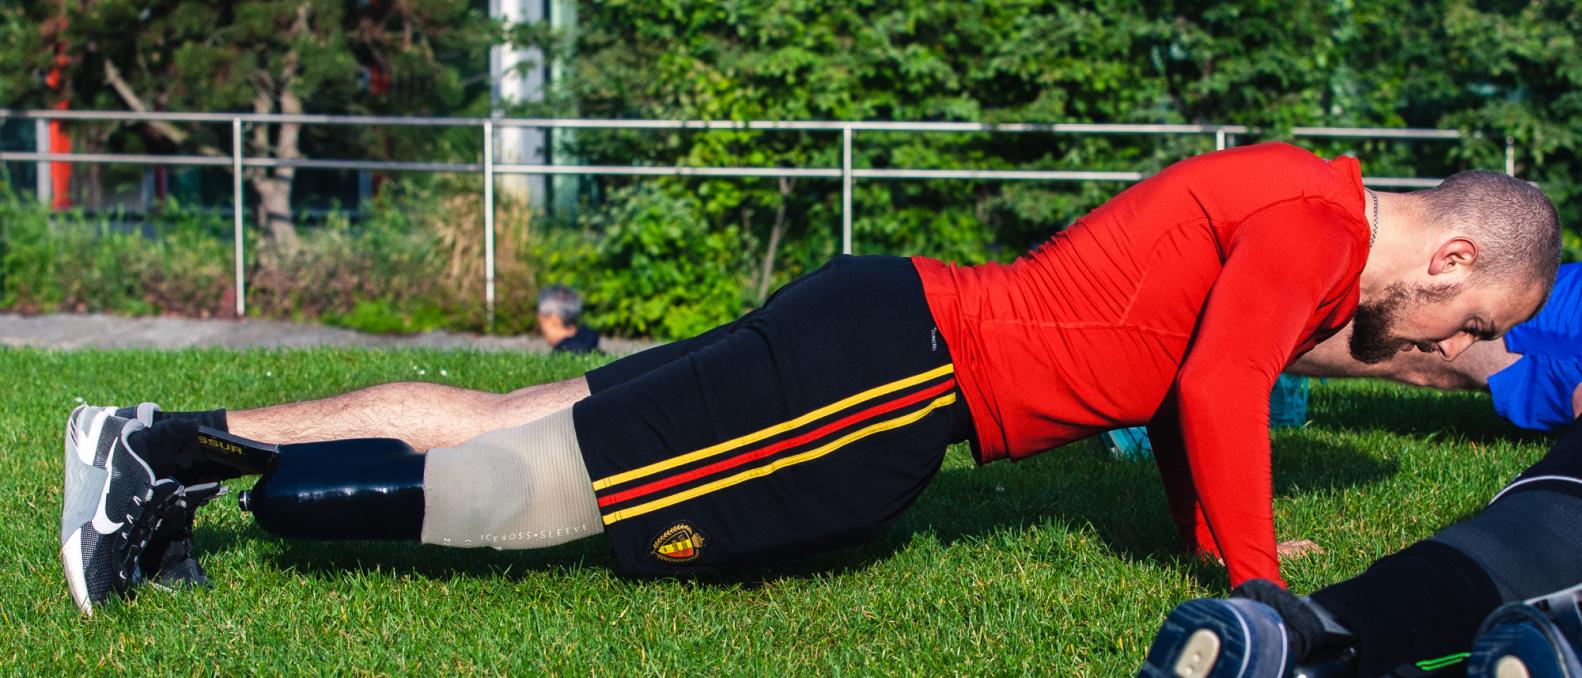 Athlete in red jersey warms up with push-ups, prosthetic leg visible. 